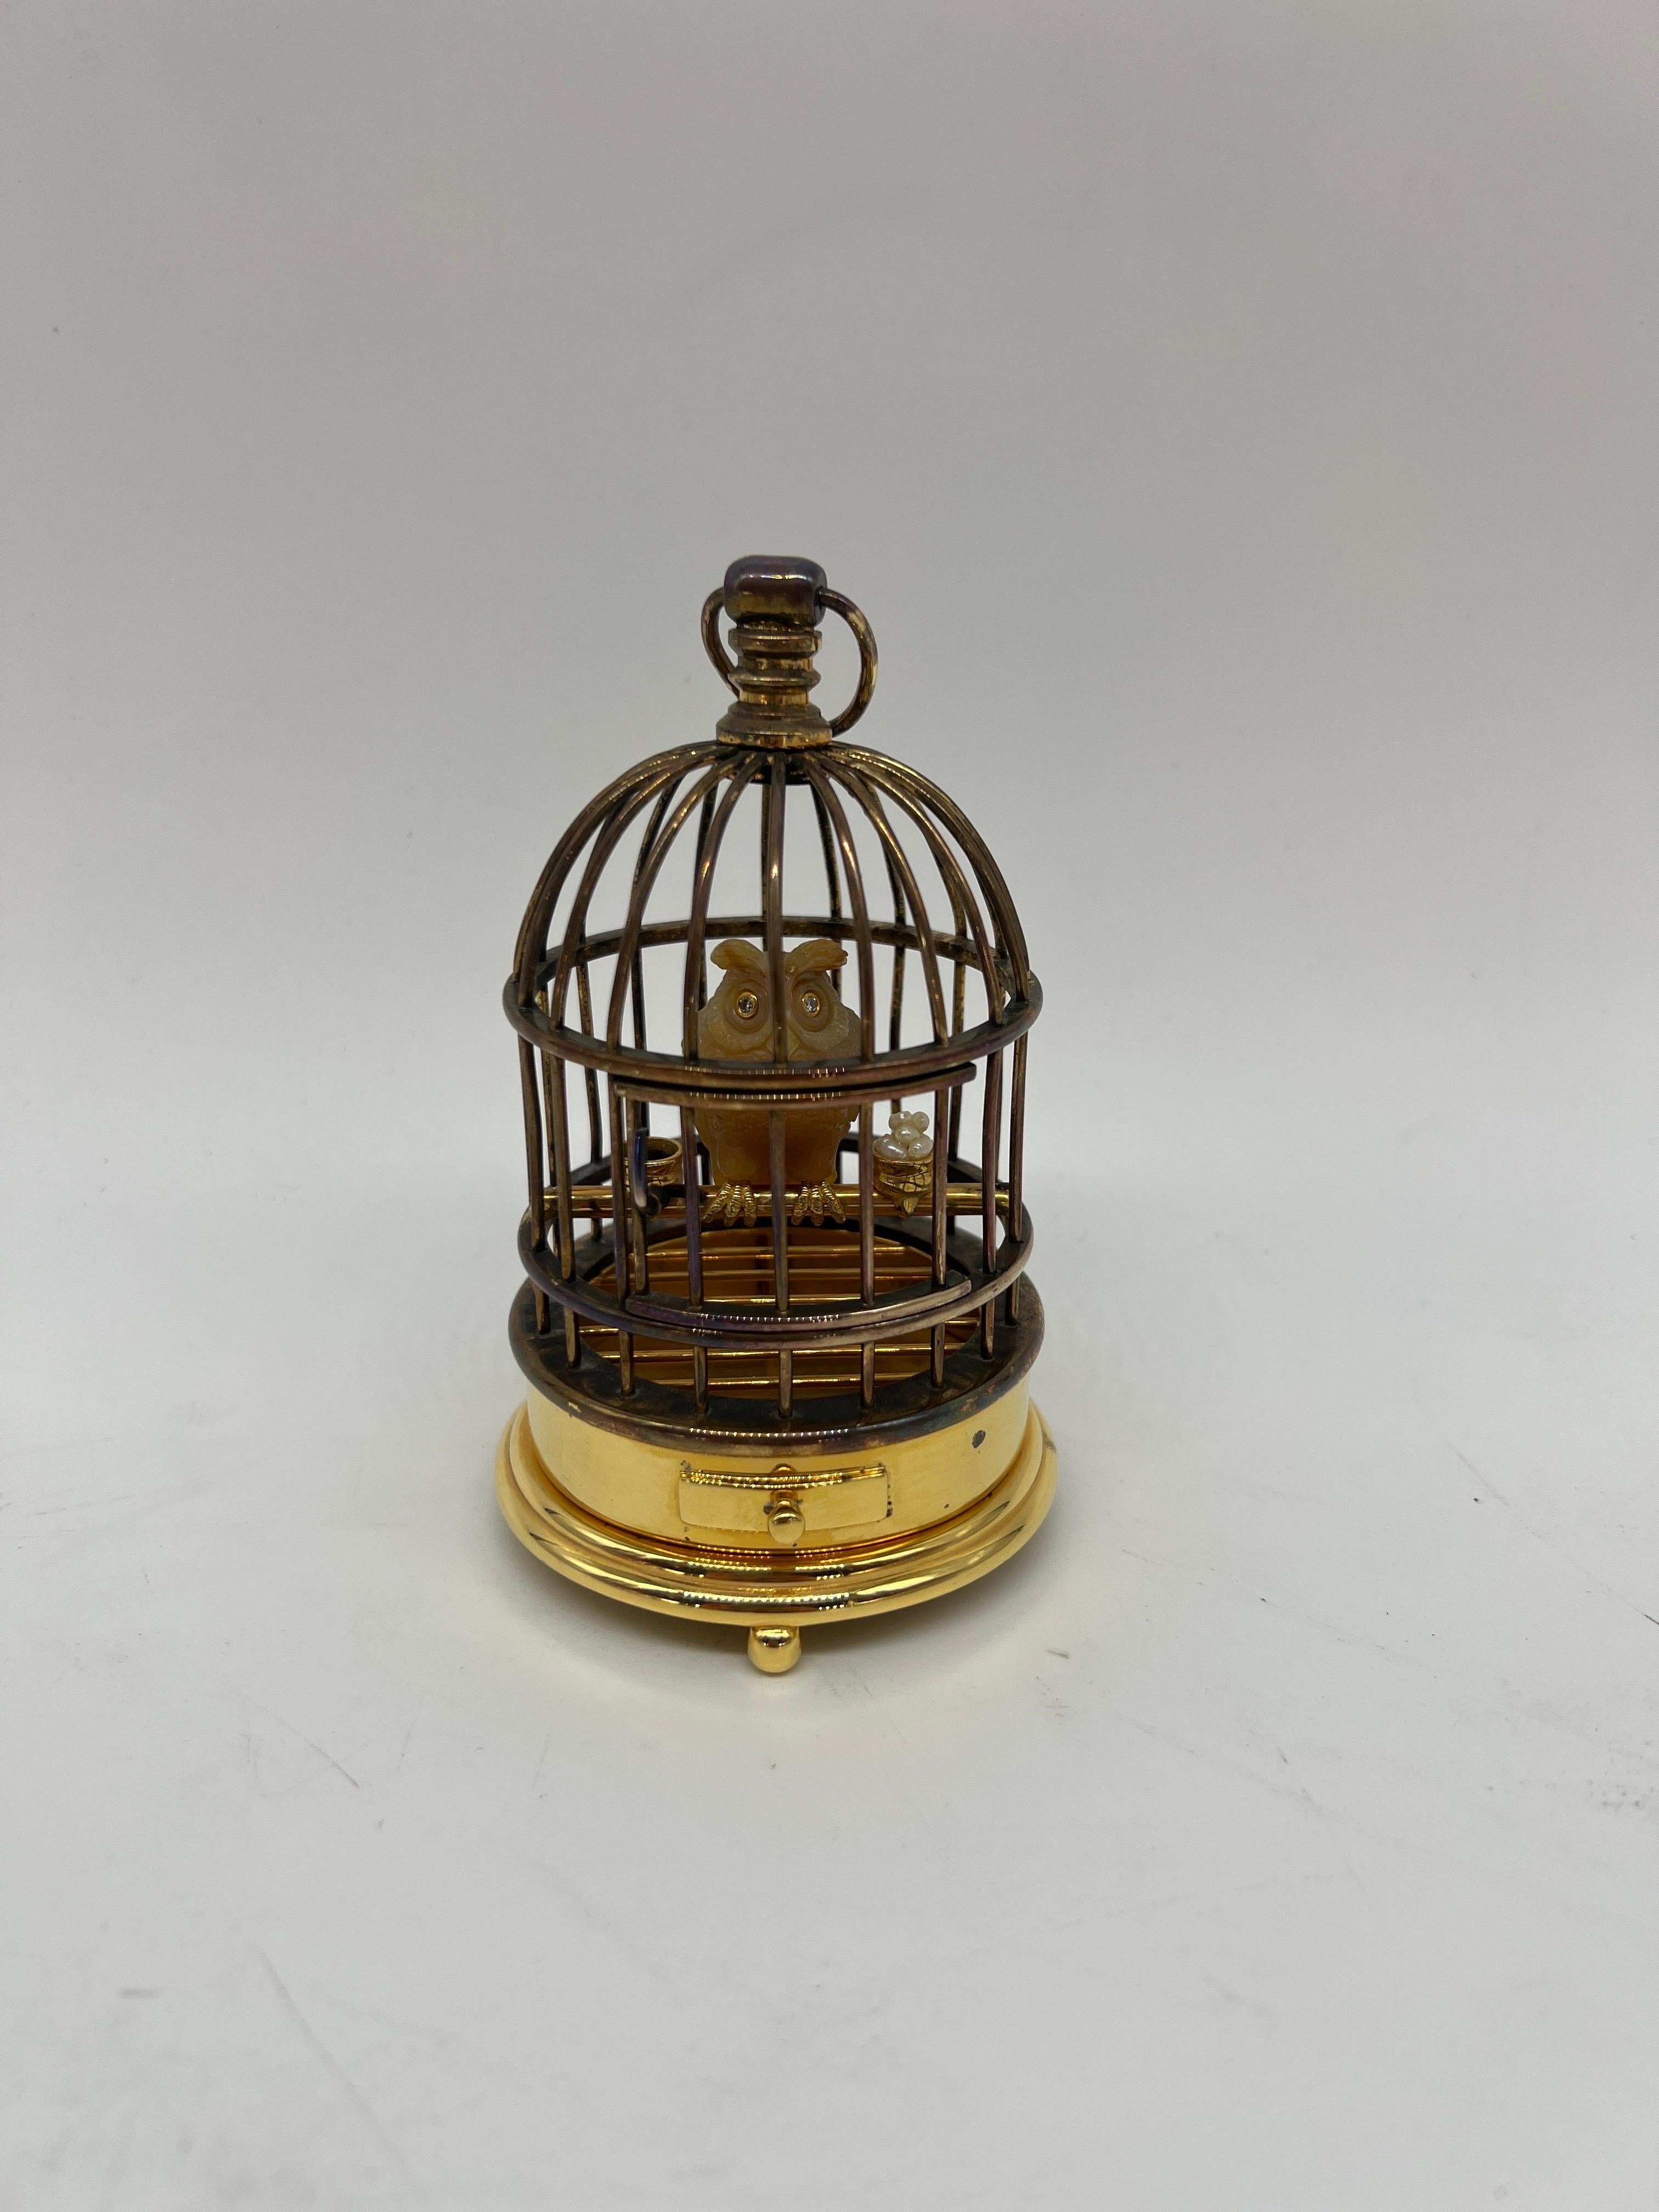 Faberge, 20th century. Jeweled and Silver-Gilt Model of an Owl in a Cage Diamond & Sterling.

This agate stone and realistically carved owl features diamond eyes and silver-gilt claws, in a silver-gilt cage with drawer and door. Flanking the owl is